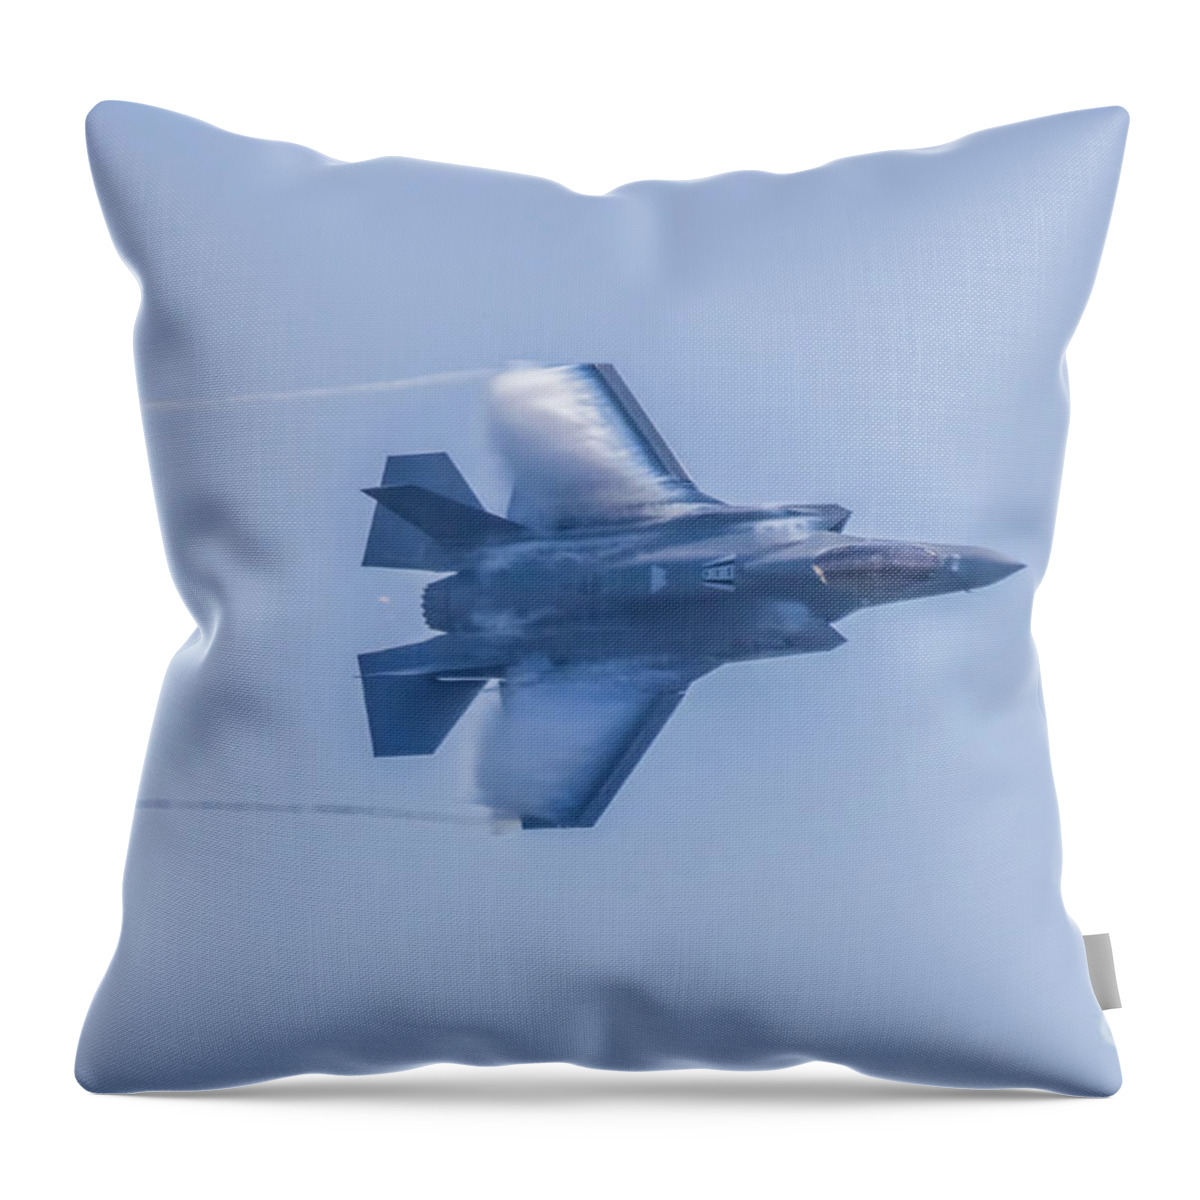 Aircraft Throw Pillow featuring the photograph F-35 Lightning II Vapor Trail by Jeff at JSJ Photography